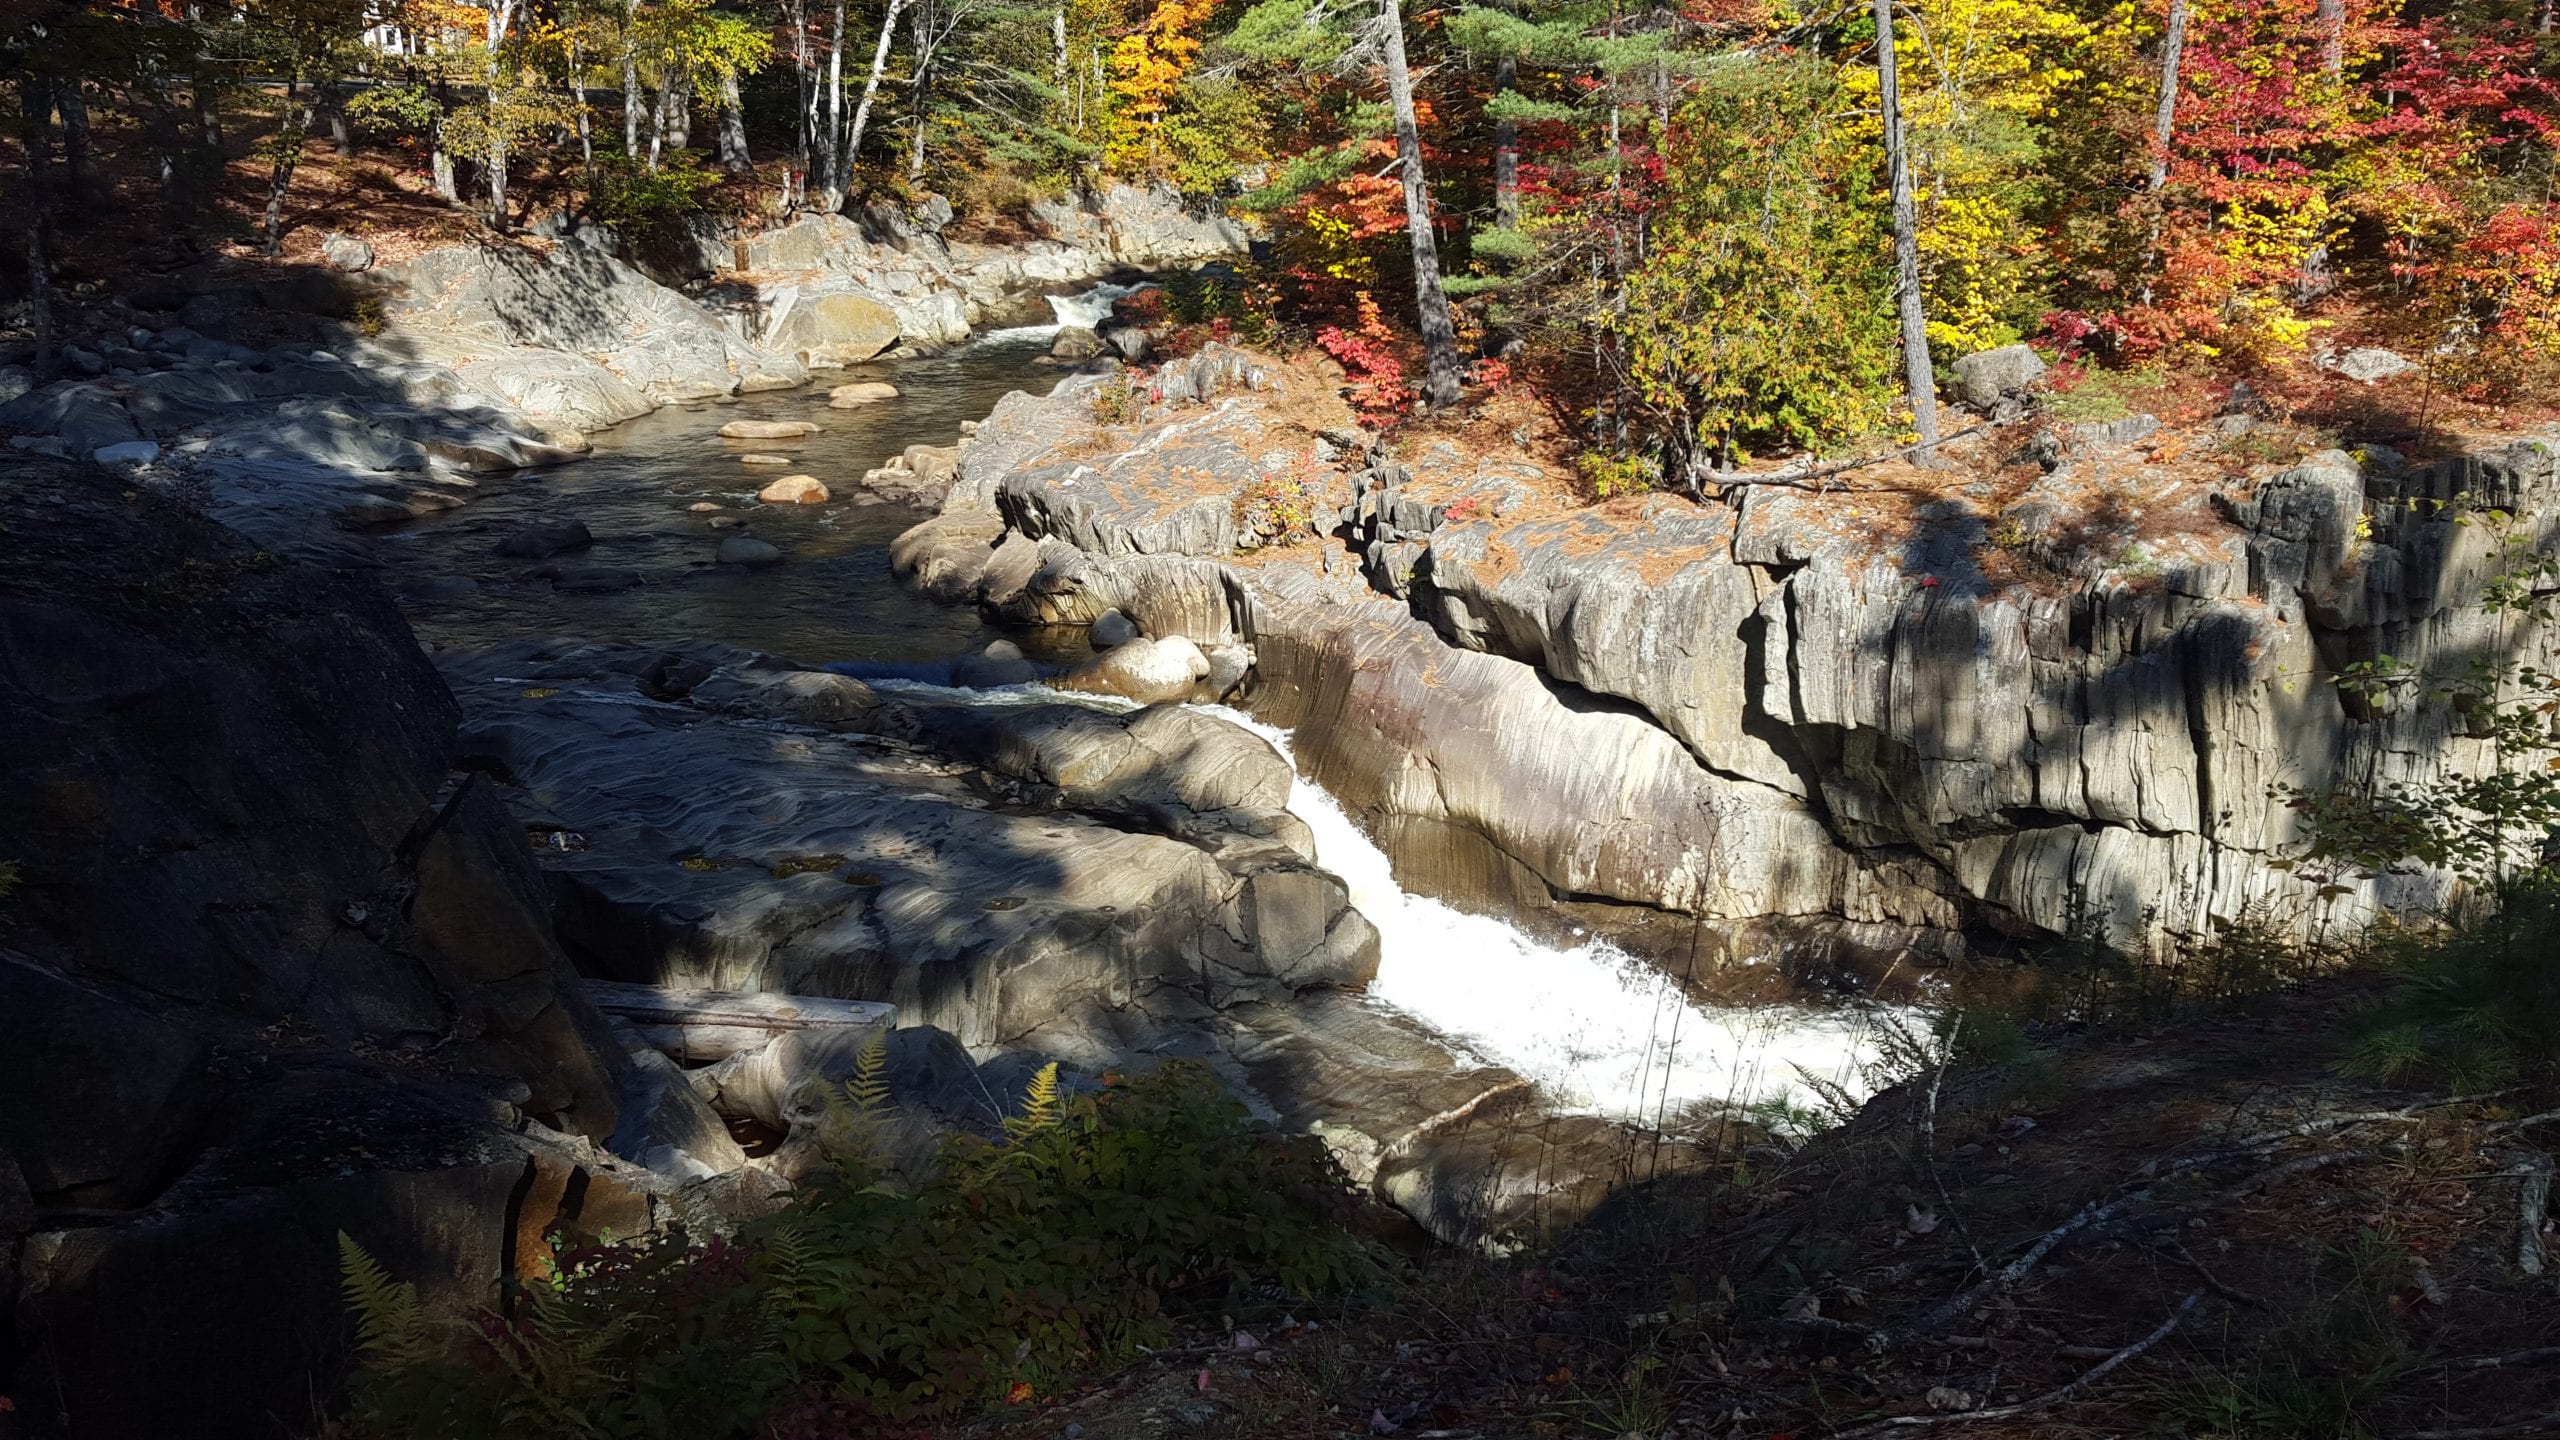 Coos Canyon: Maine’s Popular Roadside Stop and Gold Panning Location